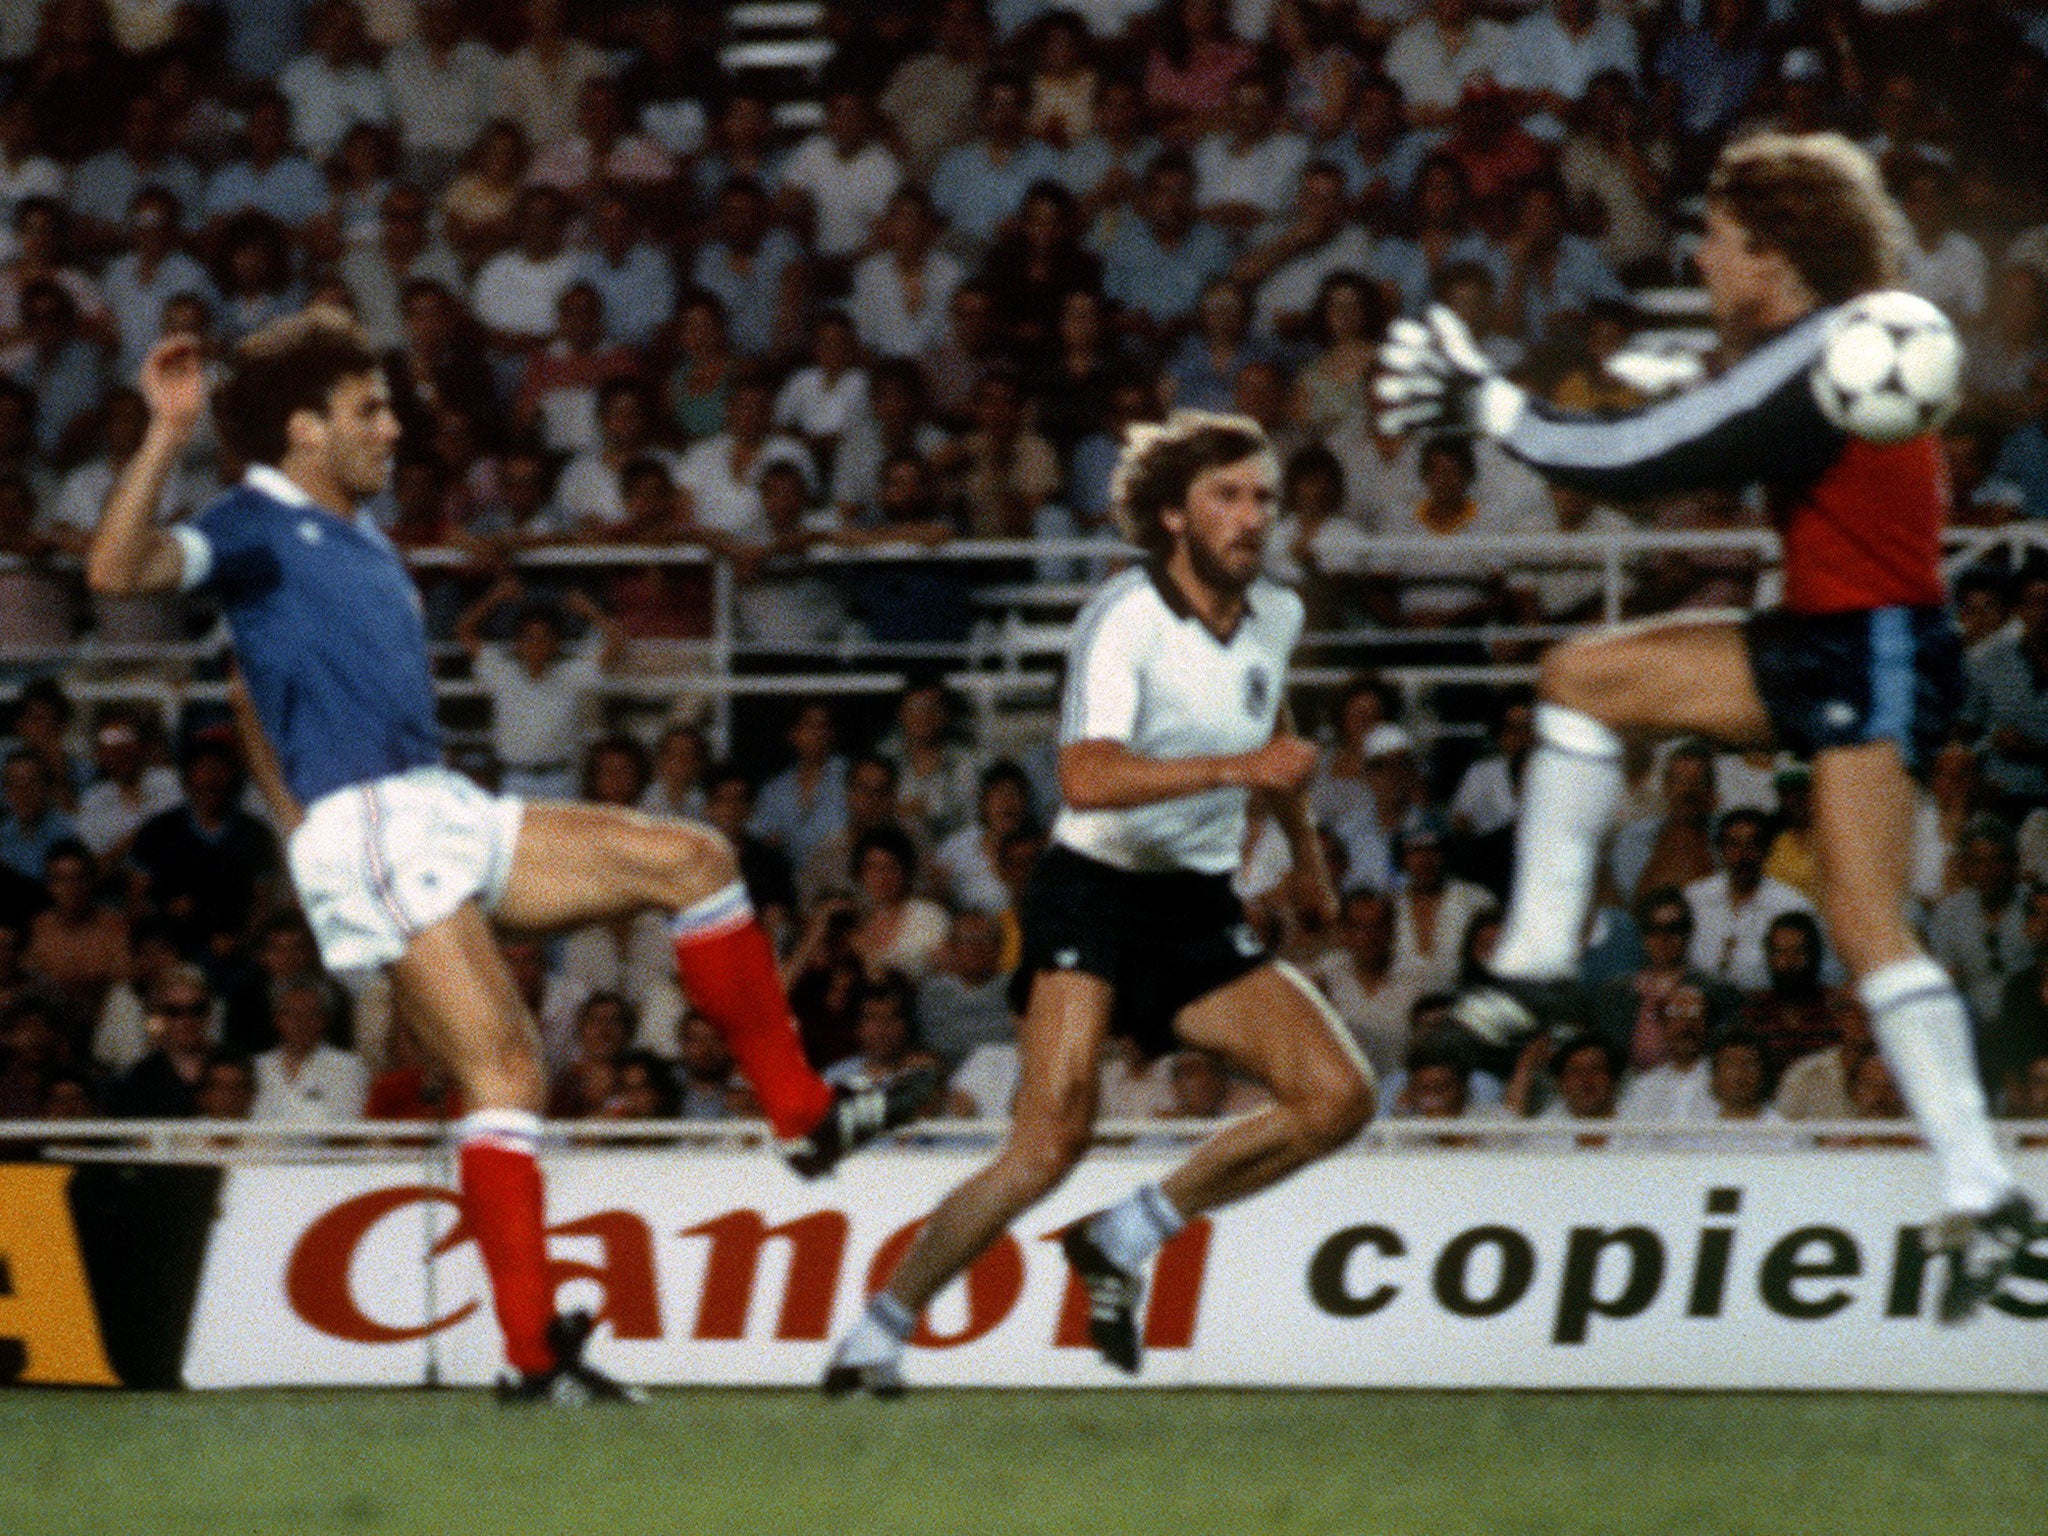 Harald Schumacher (right) charges out to collide with Patrick Battiston (left) in 1982